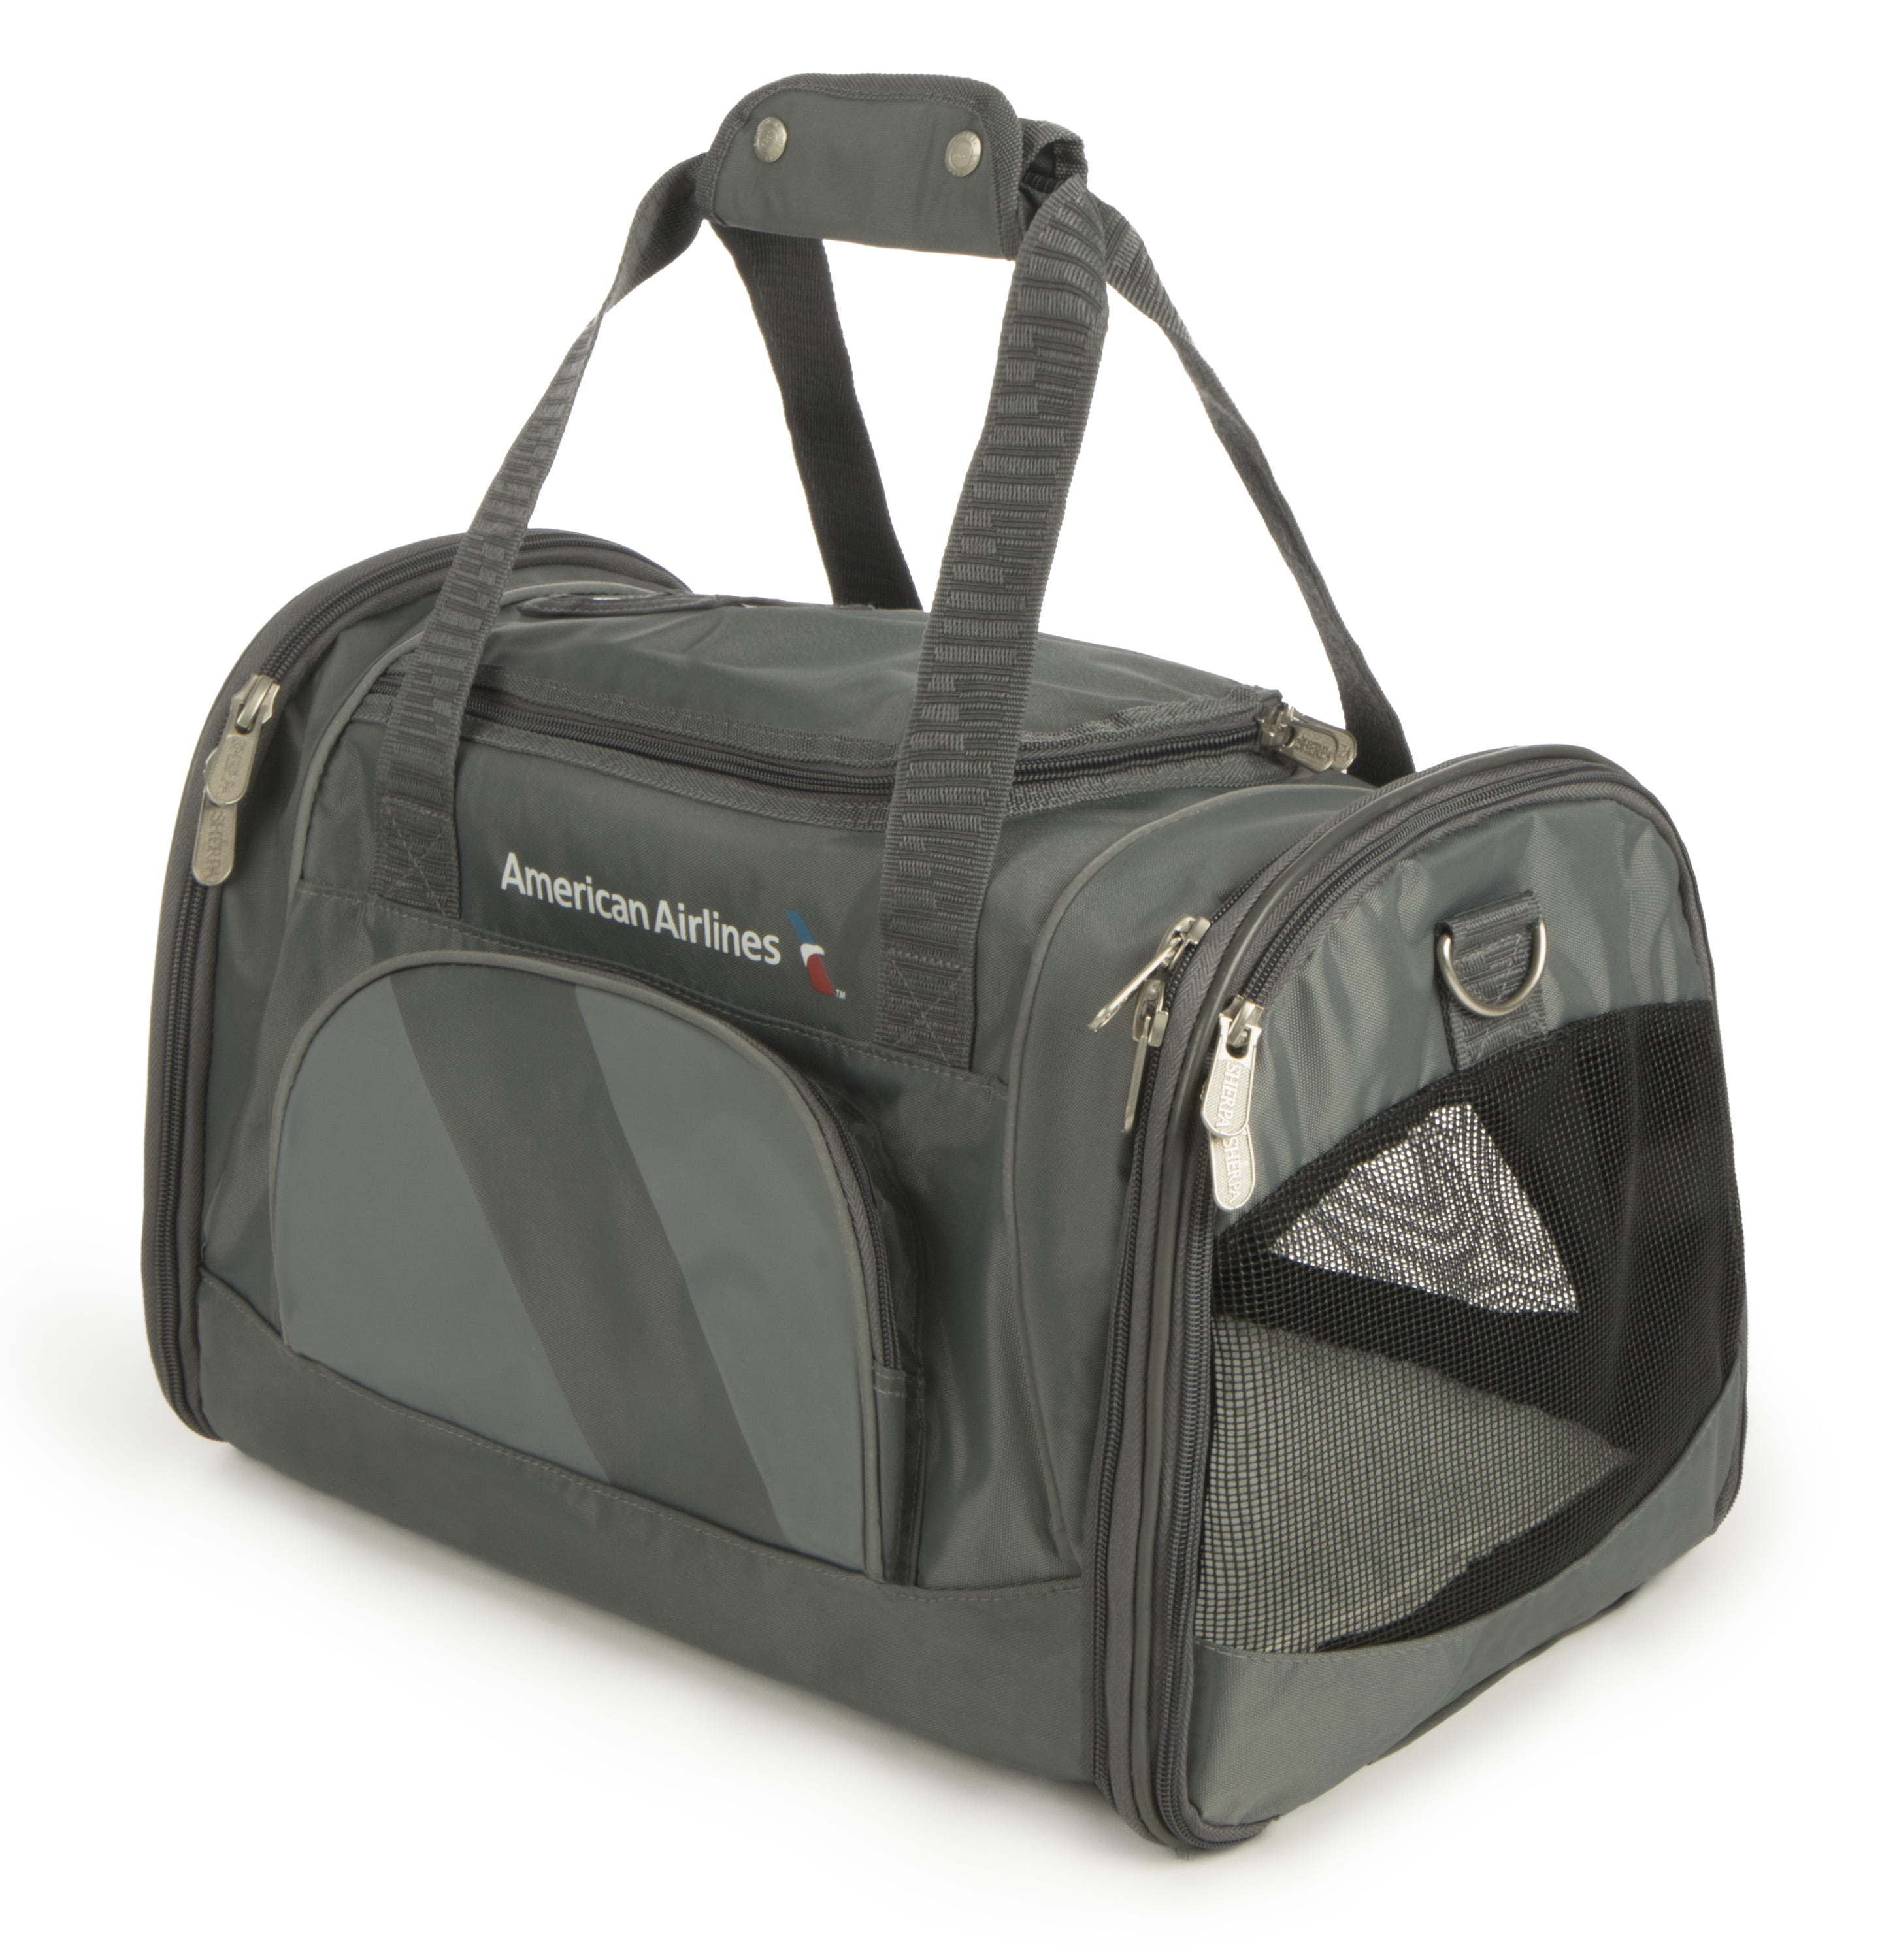 Quaker Pet Travel Pet Carrier, Airline Approved, Medium, Charcoal ...